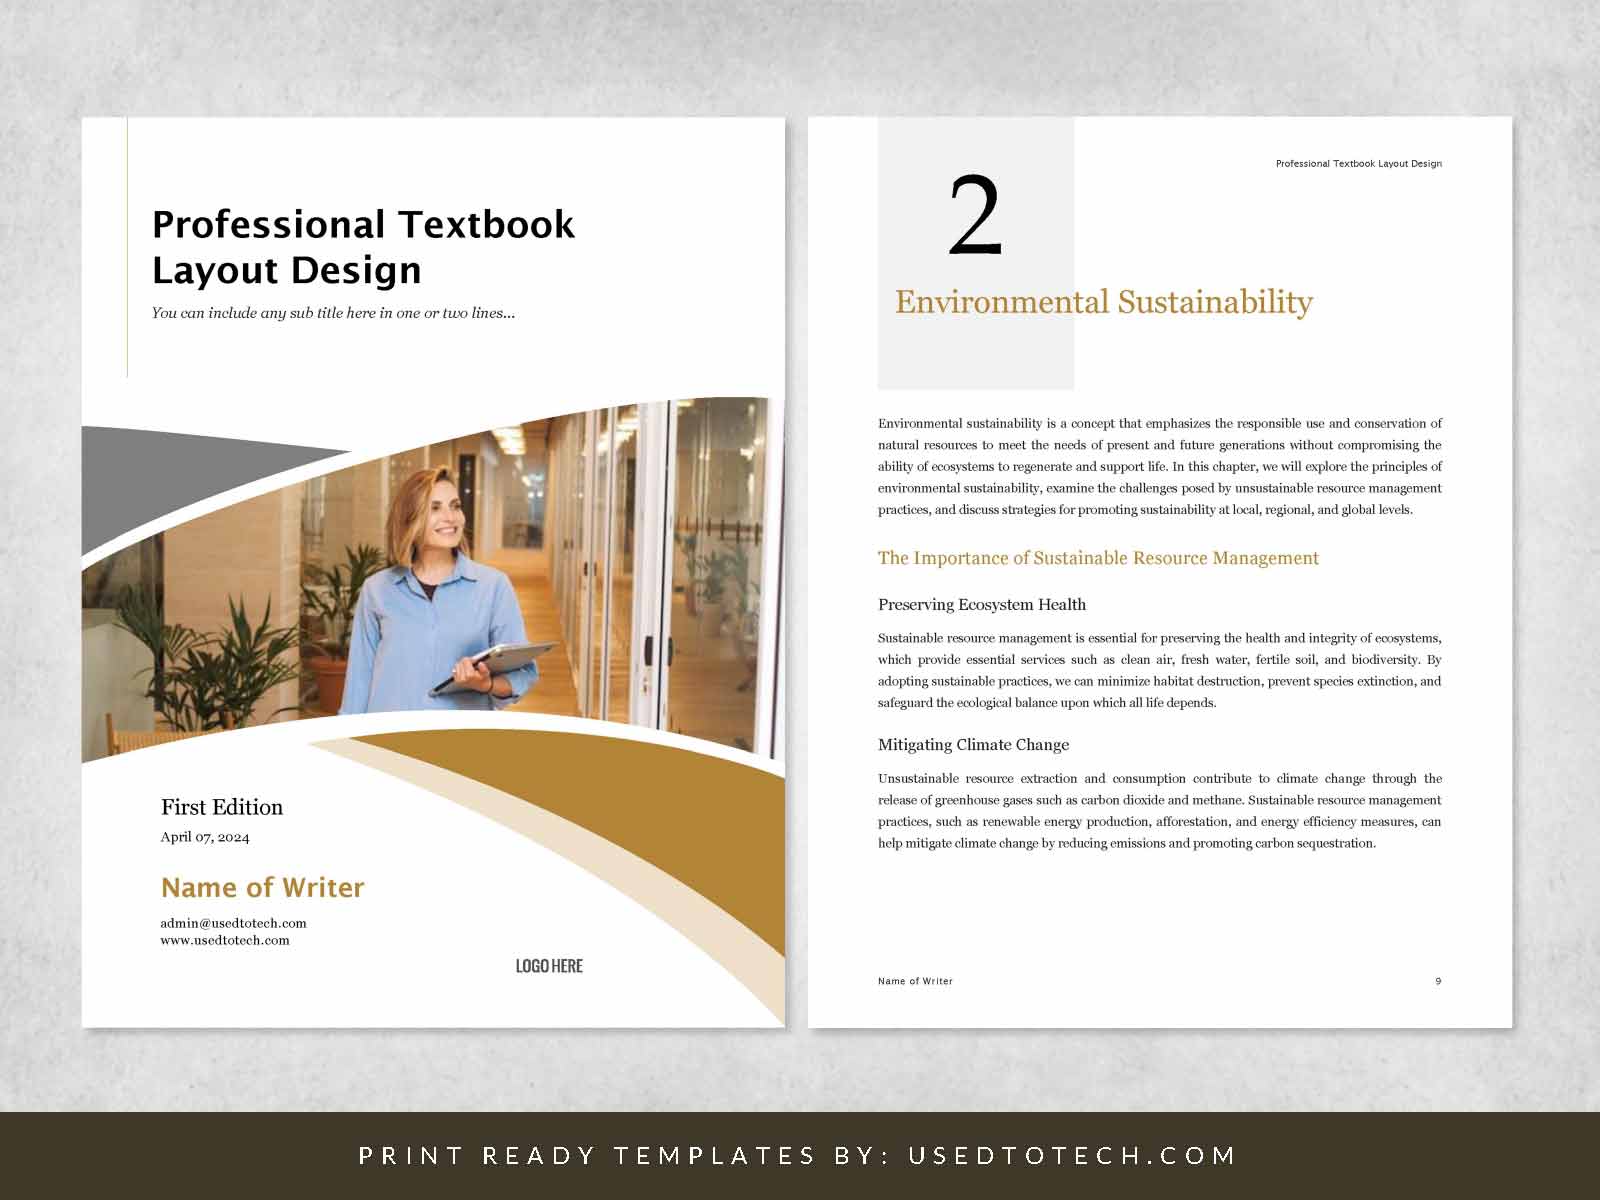 Professional textbook layout template in Word